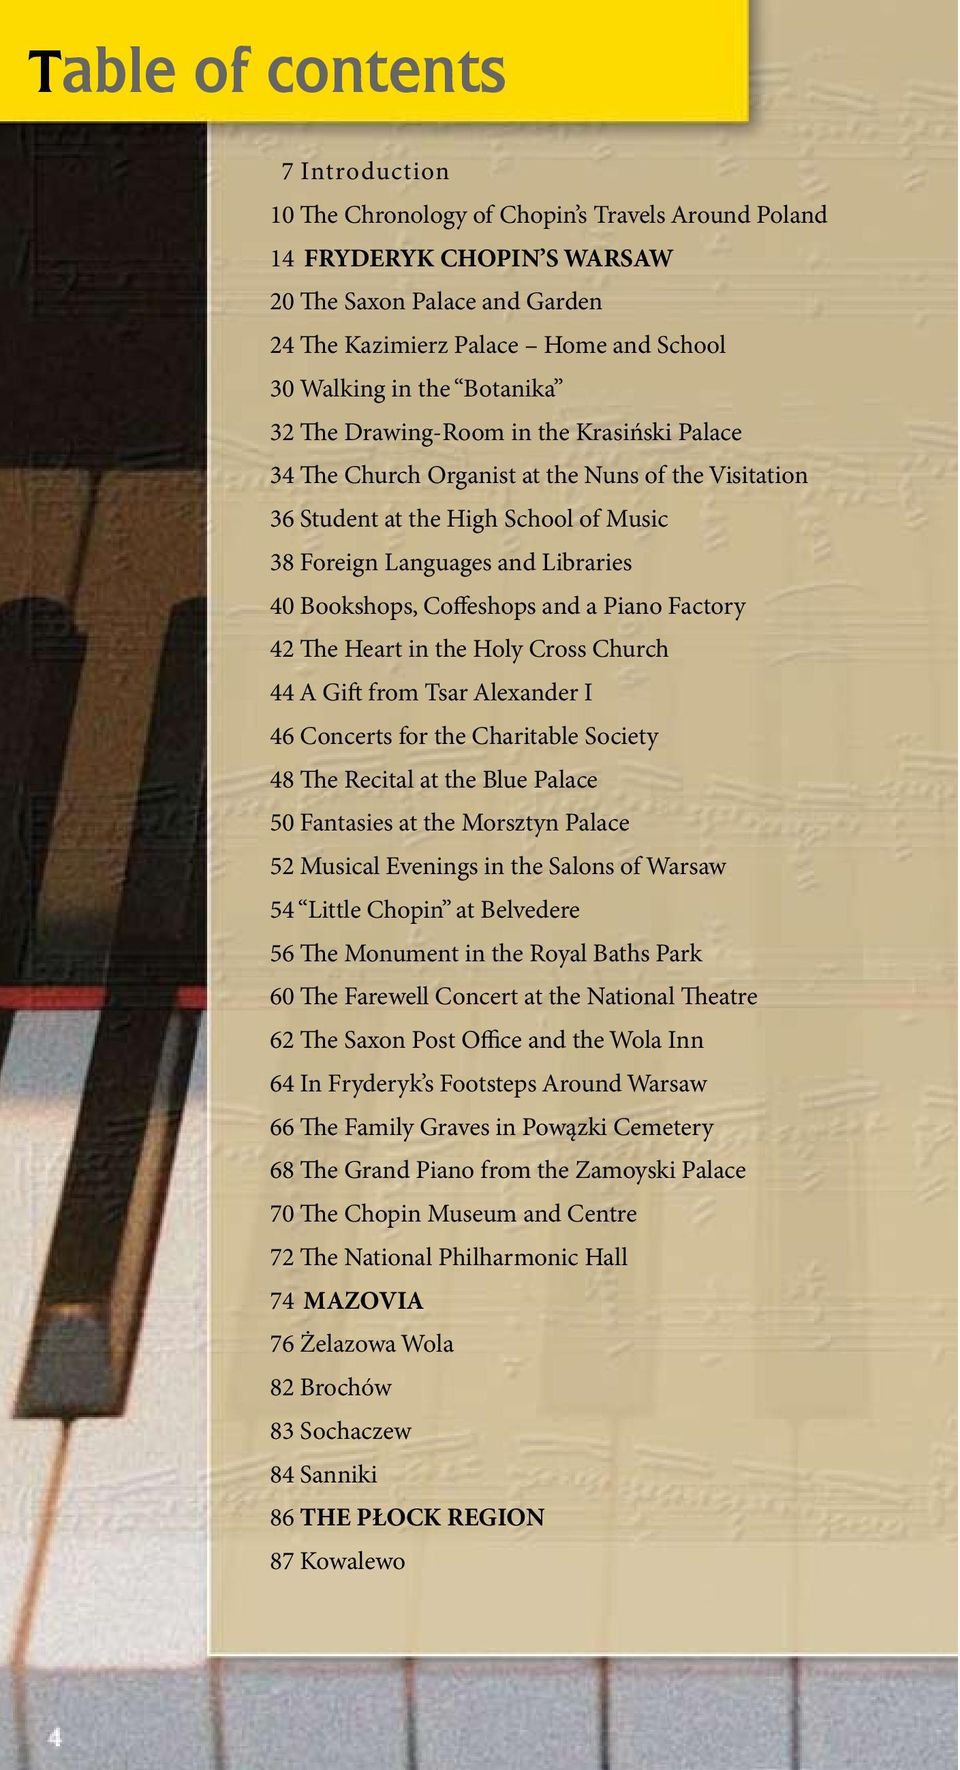 Coffeshops and a Piano Factory 42 The Heart in the Holy Cross Church 44 A Gift from Tsar Alexander I 46 Concerts for the Charitable Society 48 The Recital at the Blue Palace 50 Fantasies at the